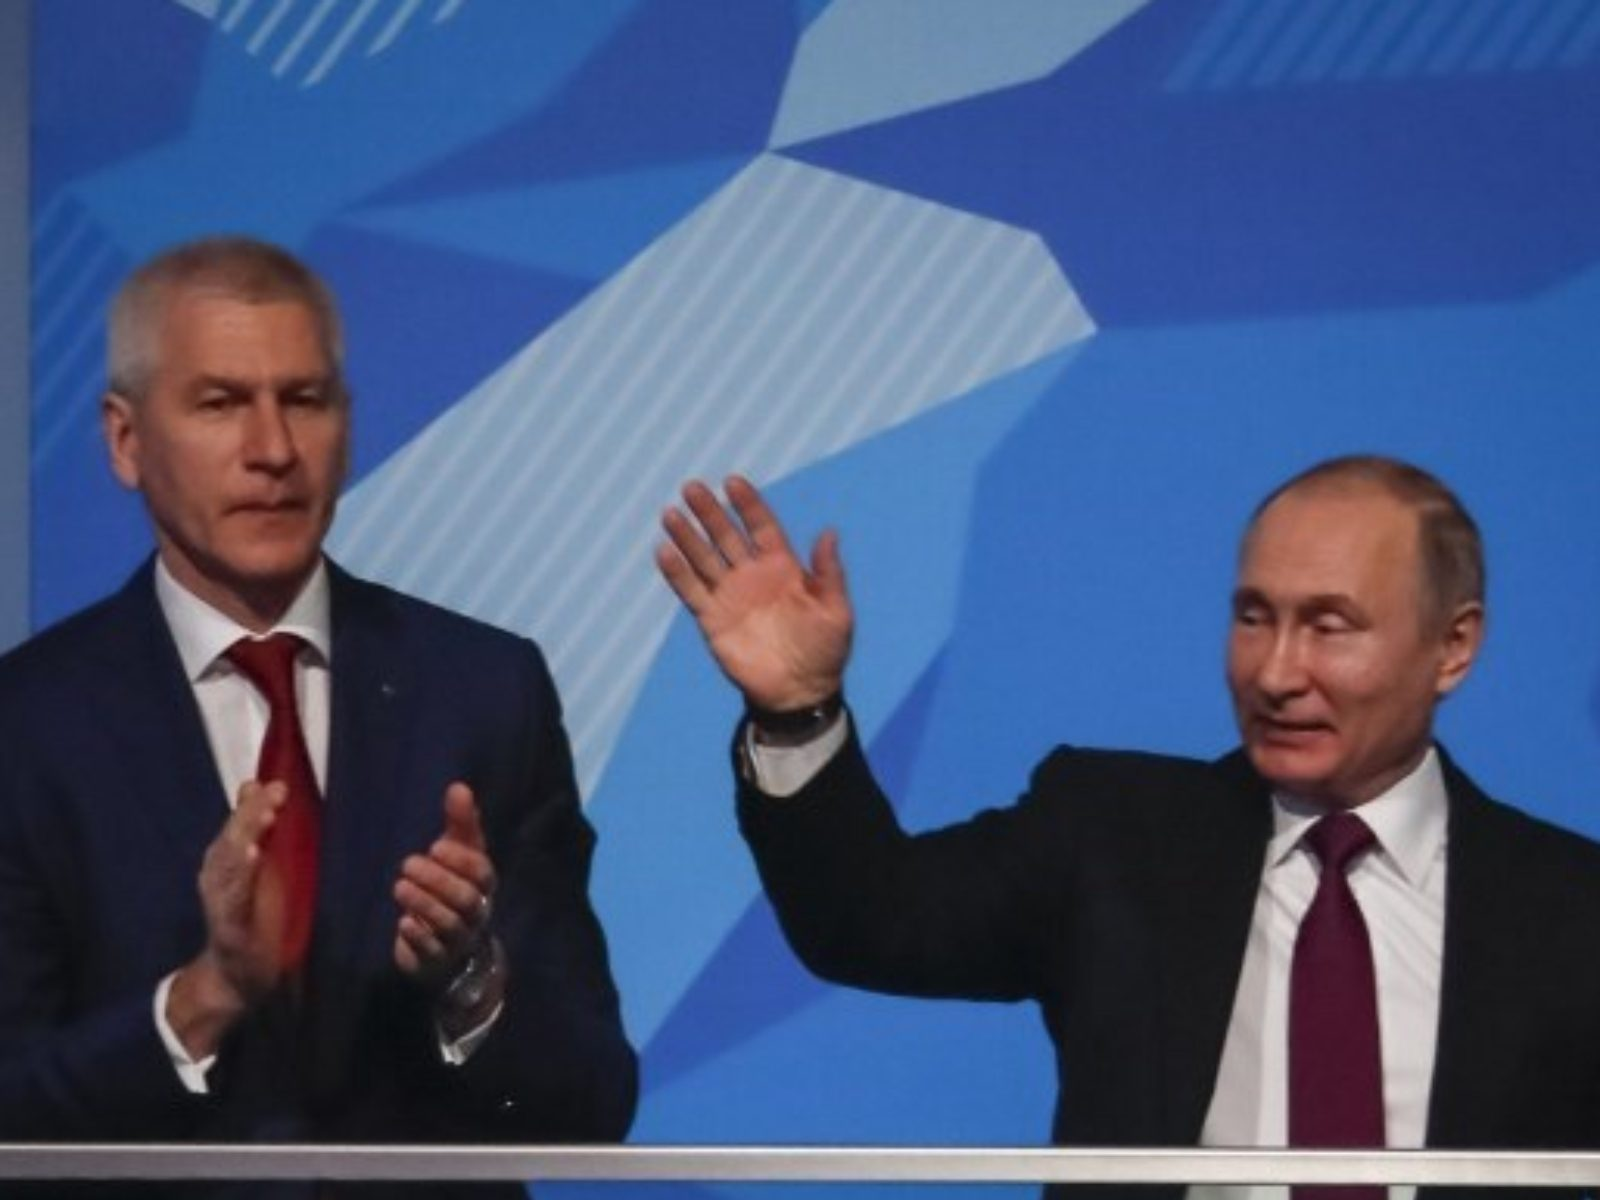 The Association of SCO Sports Organizations currently being launched by Oleg Matytsin, left, is the idea of Vladimir Putin, right, the Russian President  ©Getty Images